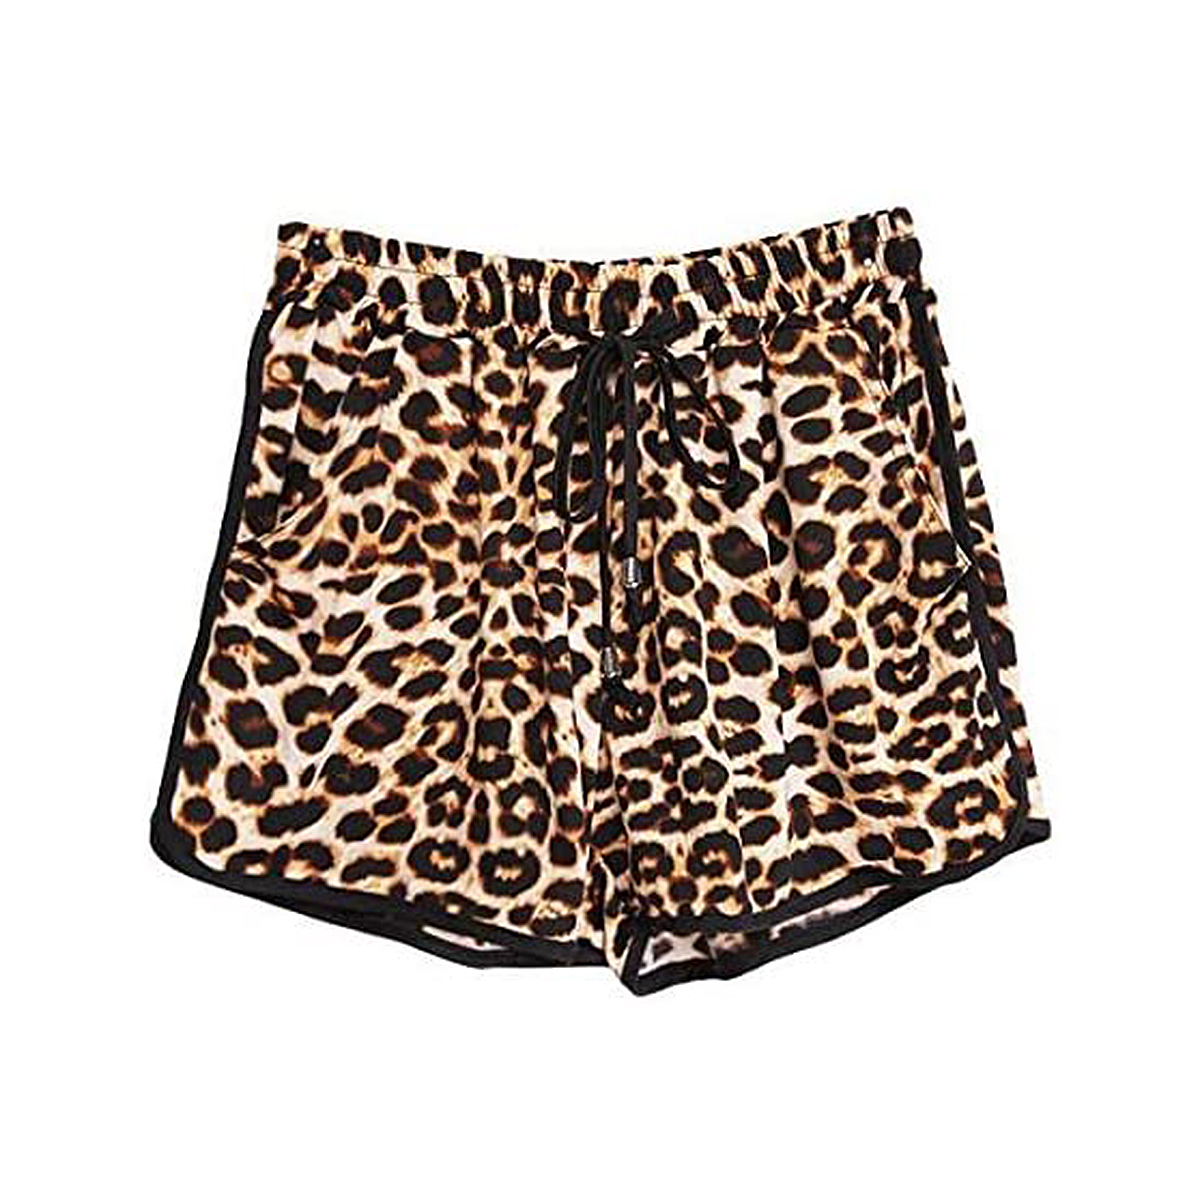 Kafeimali Leopard Shorts Will Have You Ditching Your Denim